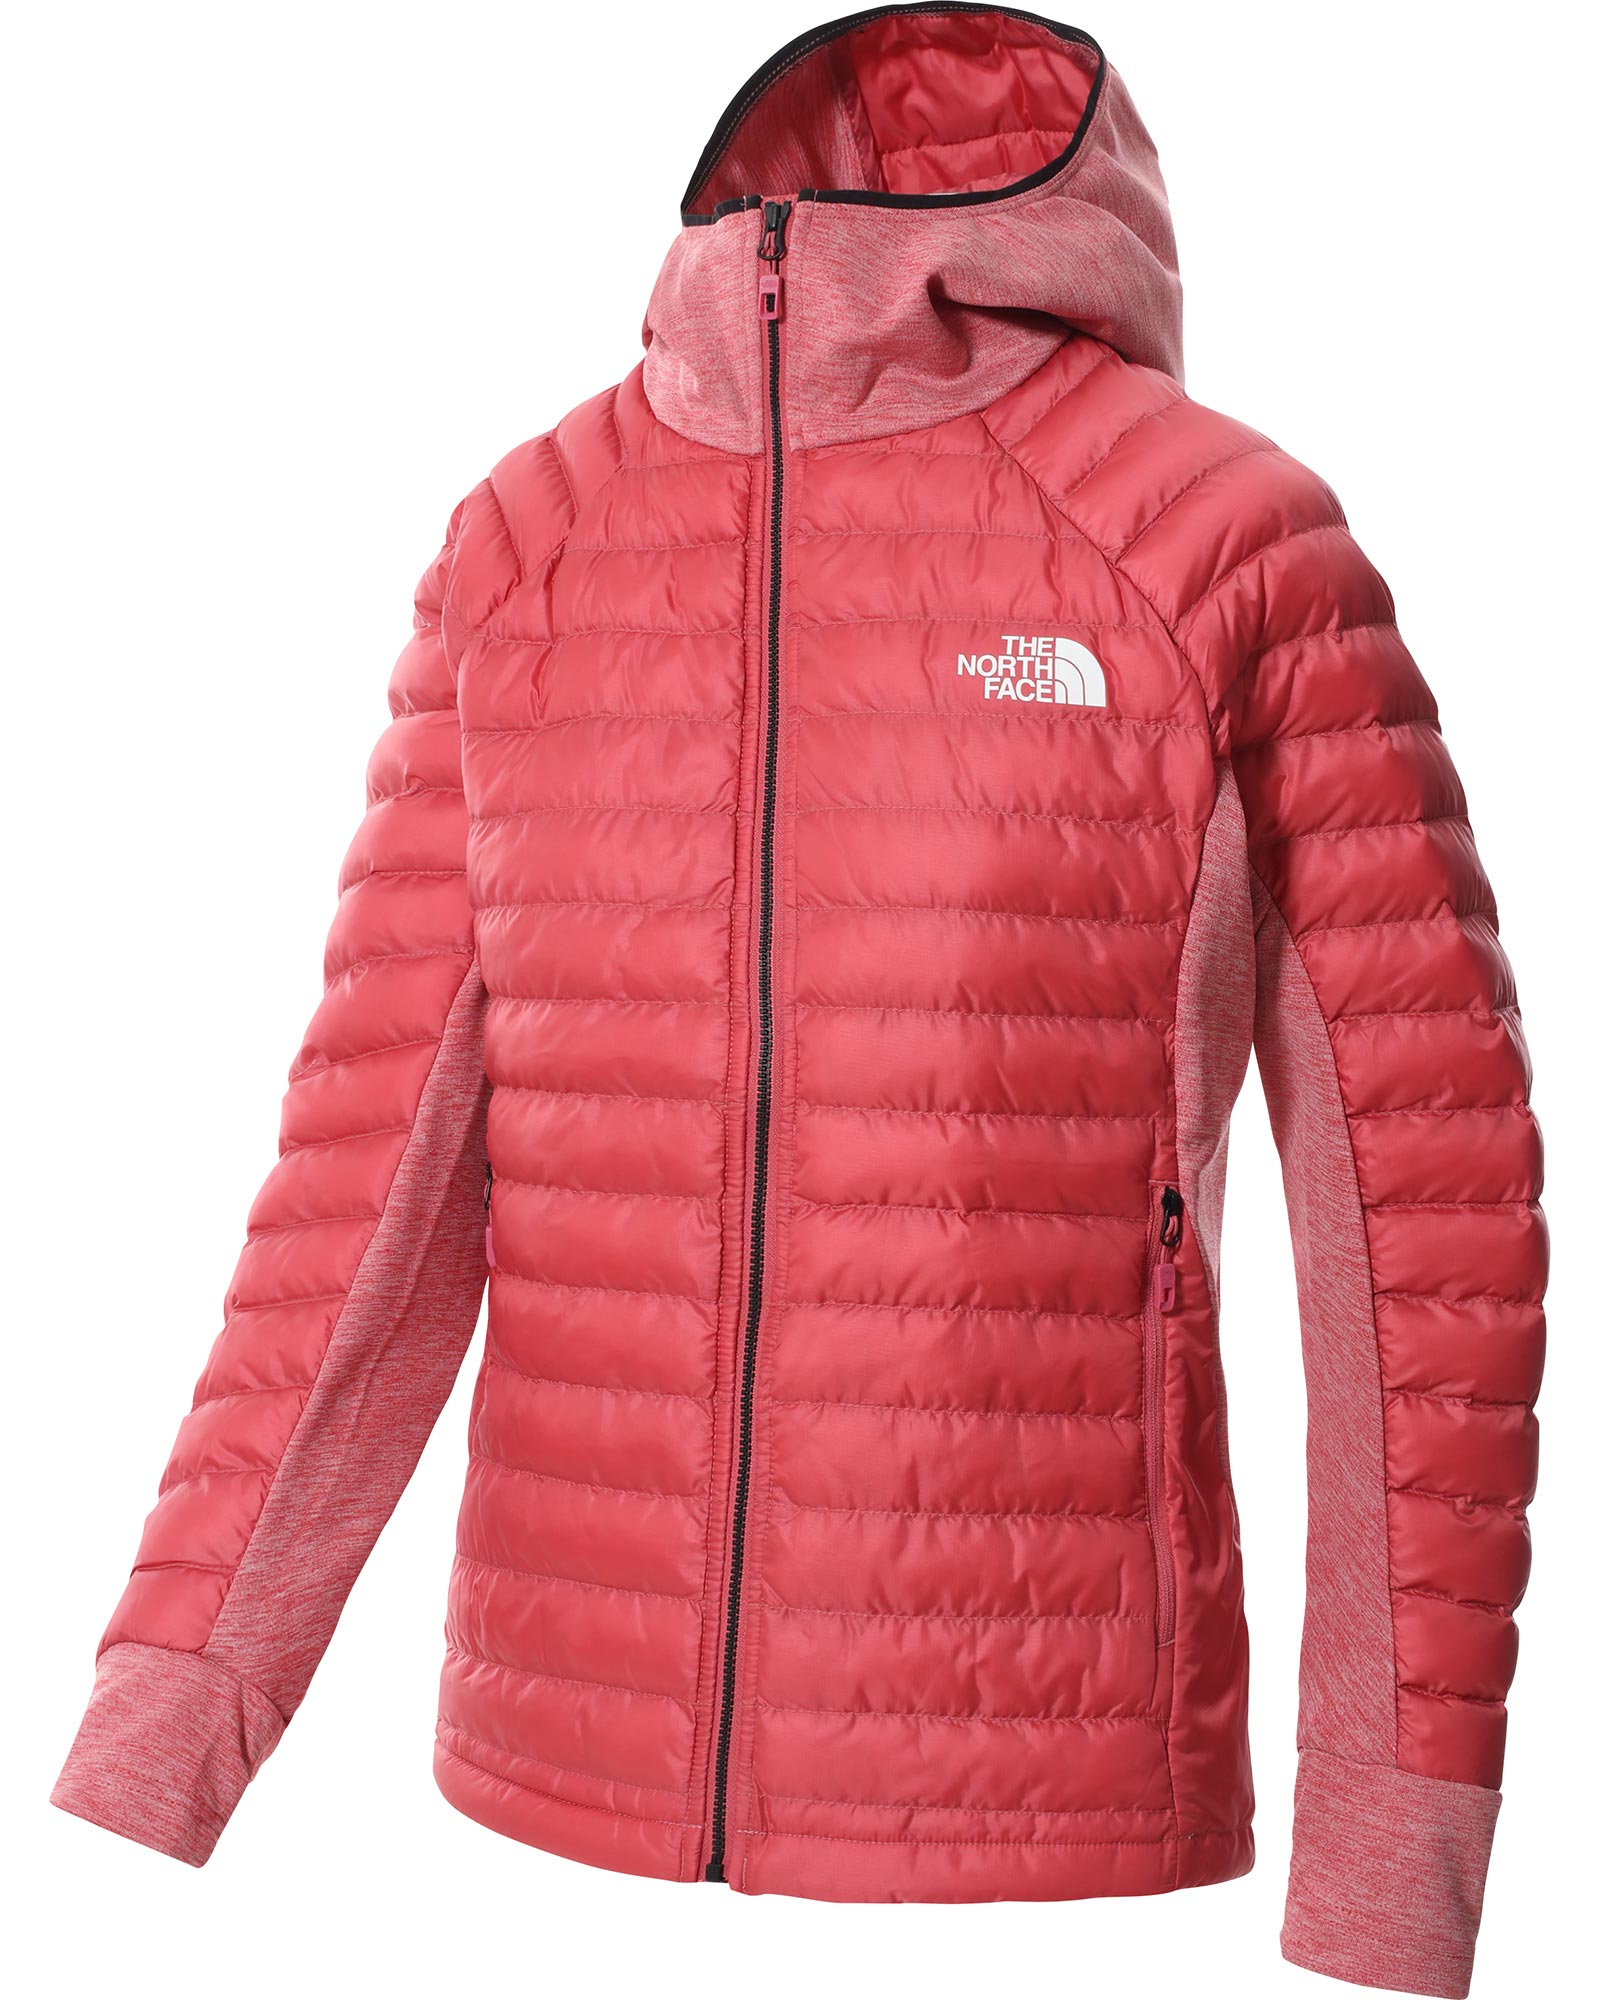 The North Face AO Hybrid Women’s Insulation Jacket - Slate Rose XS